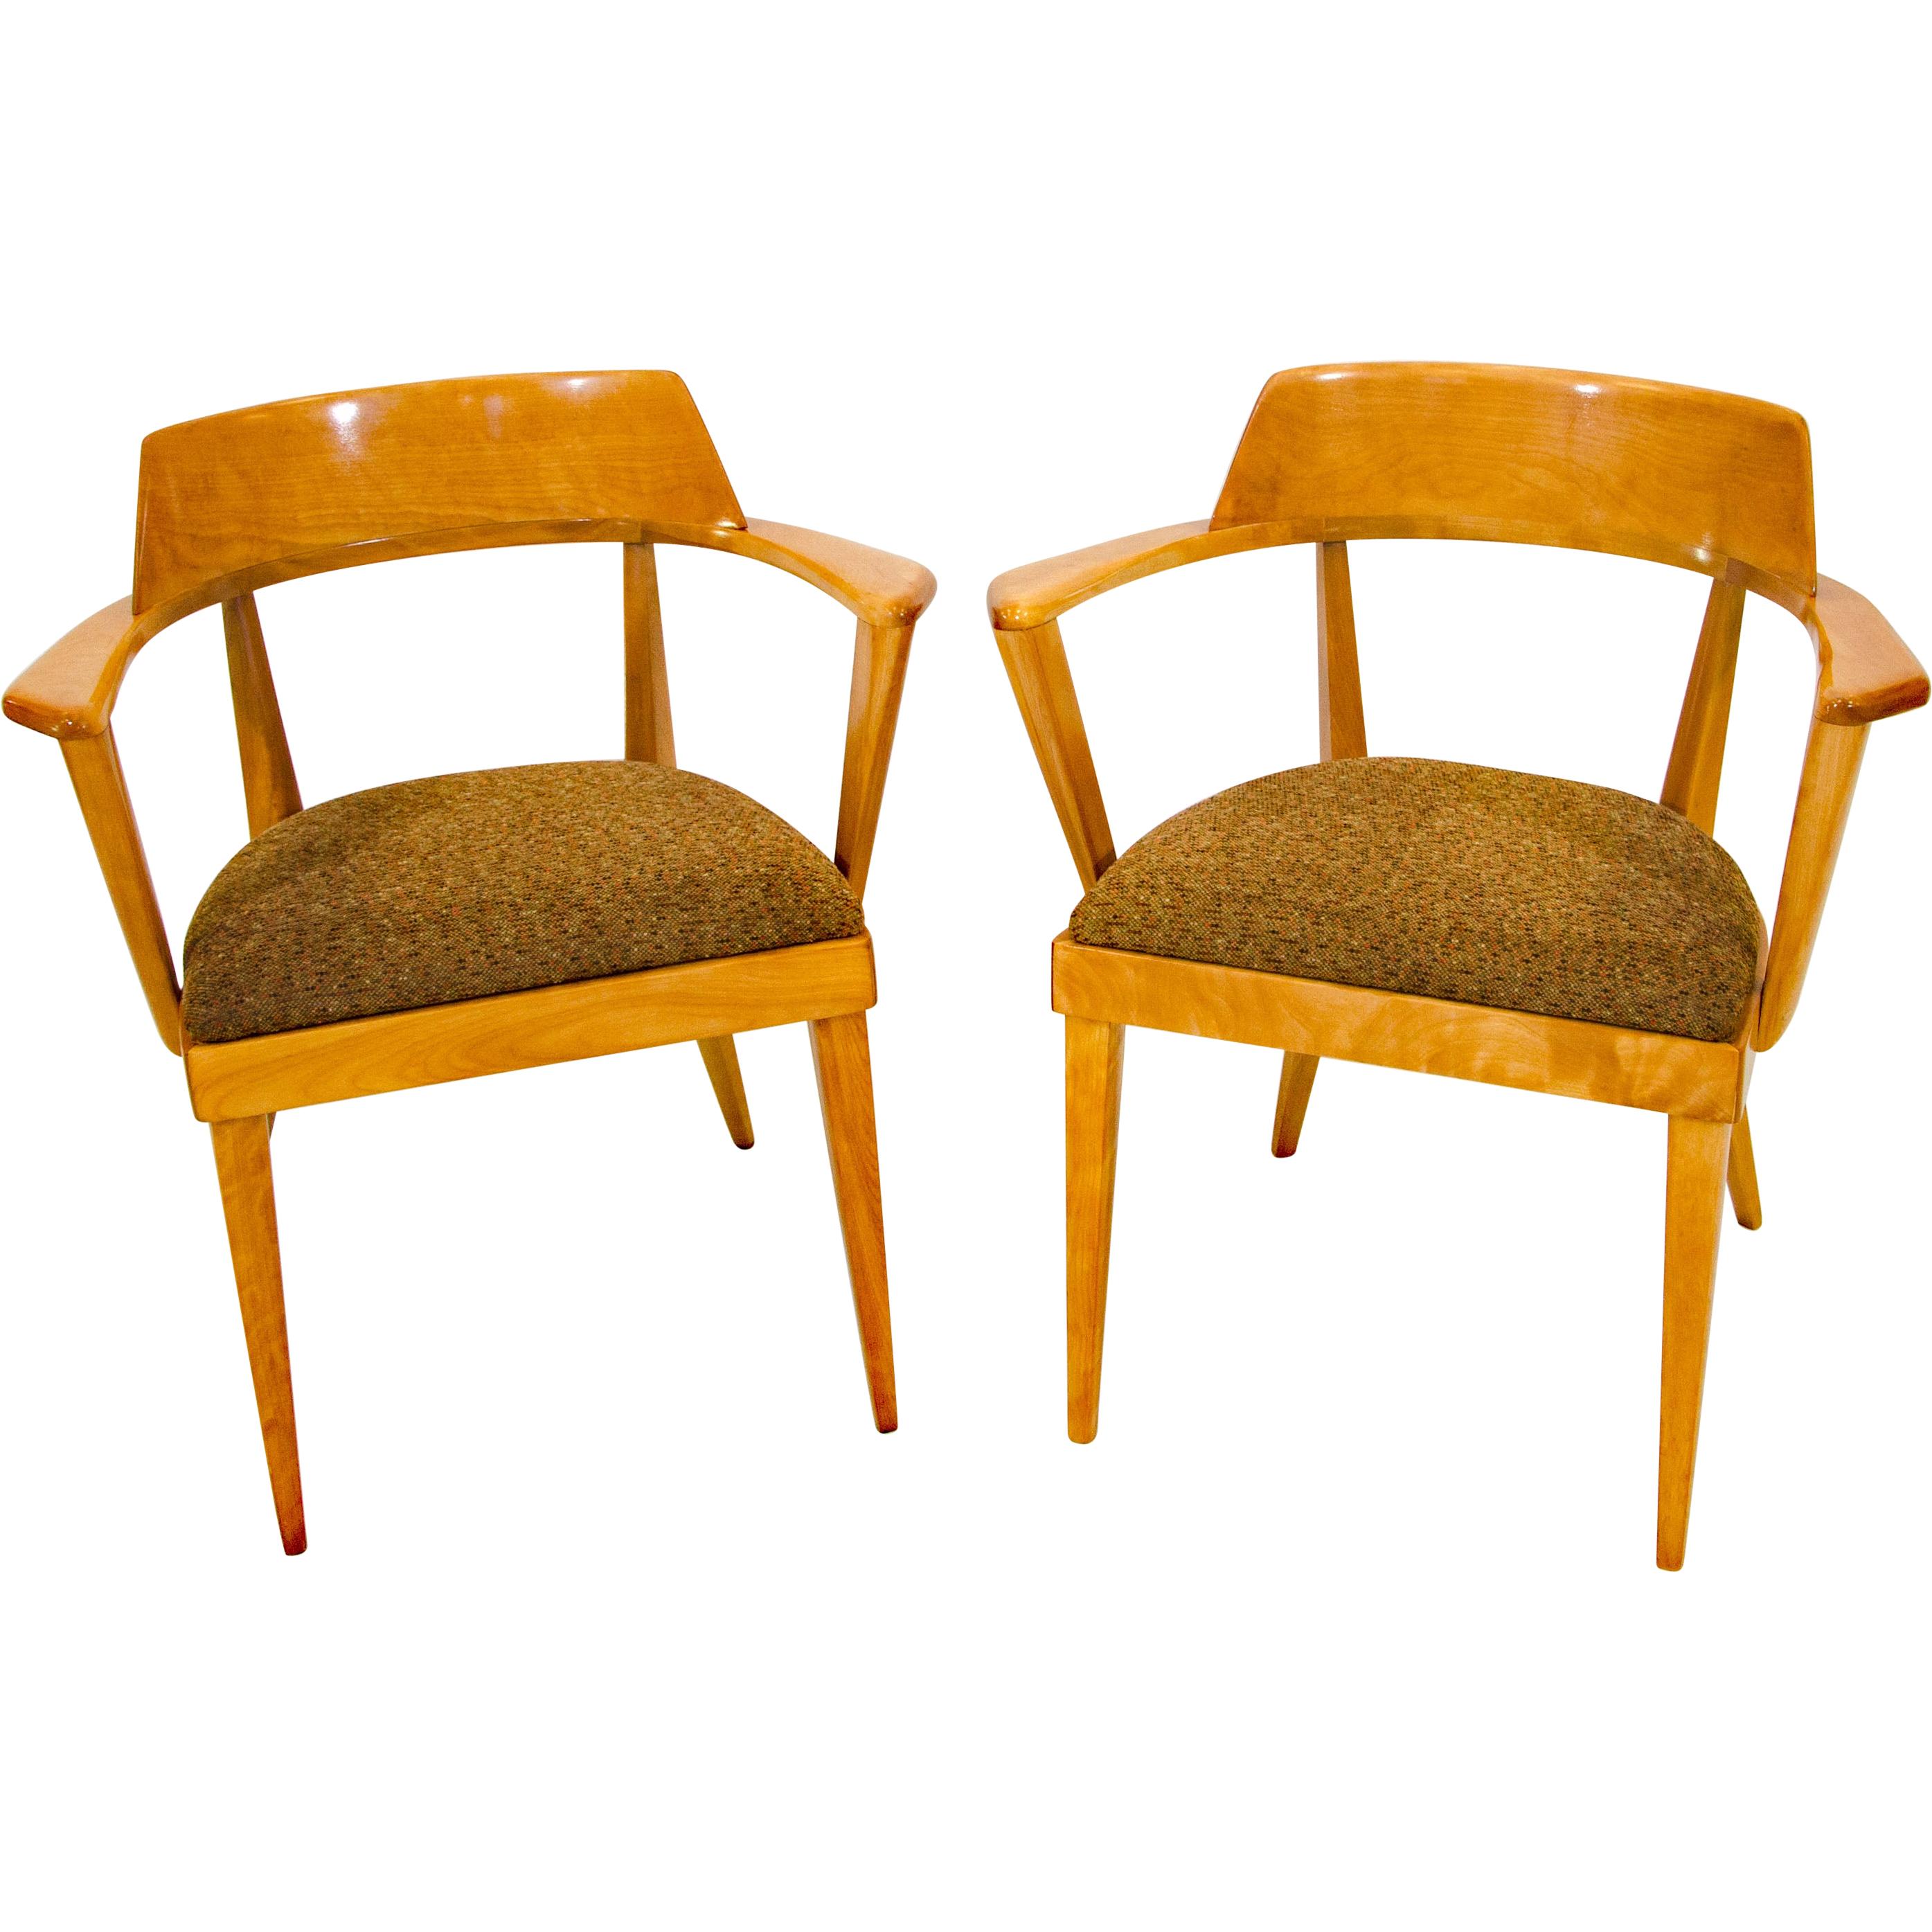 Pair of Heywood Wakefield Captains Chairs, M549